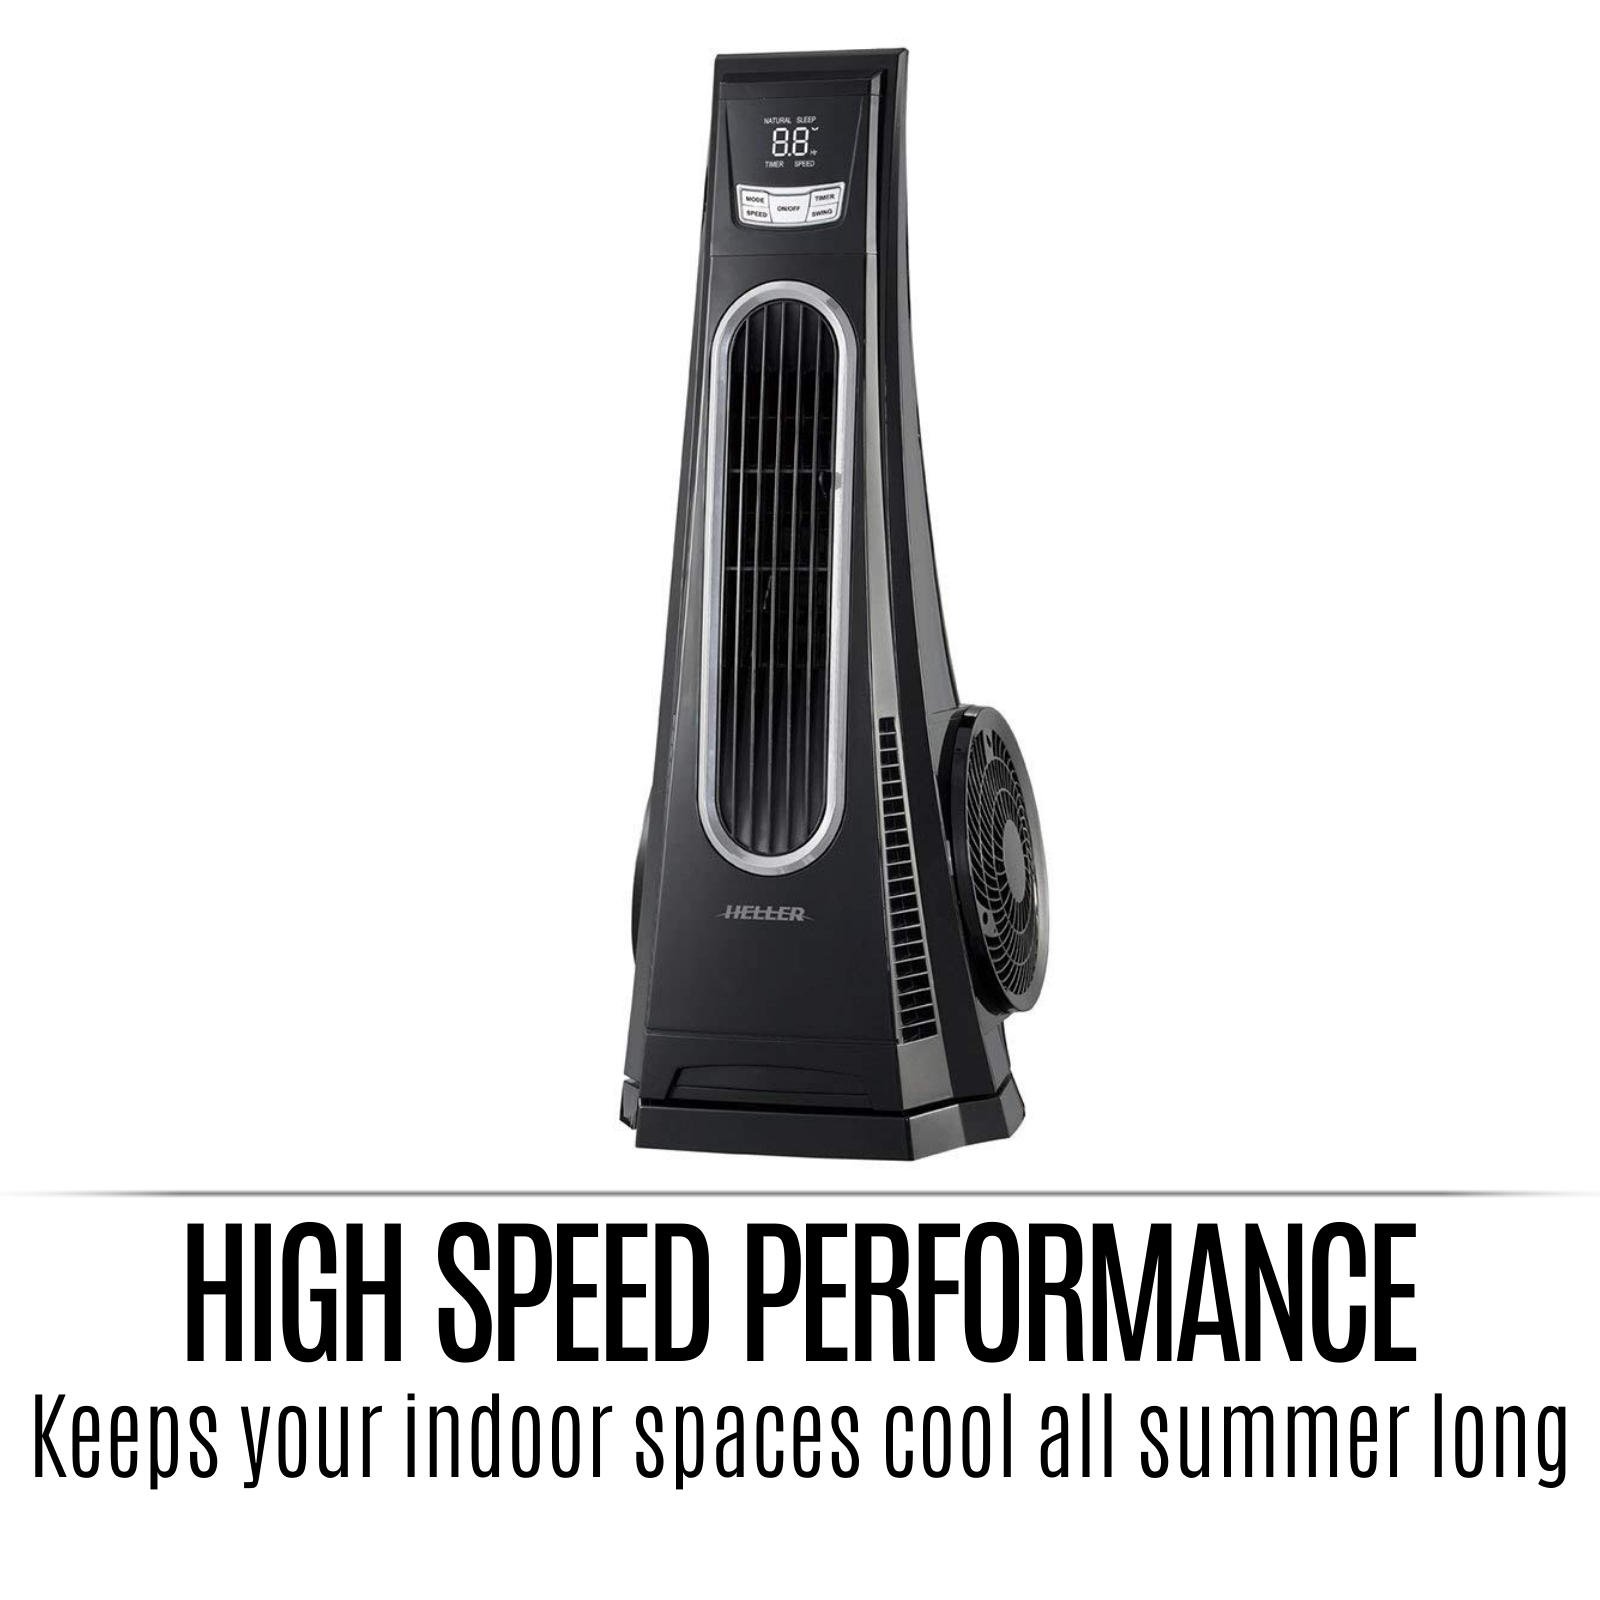 New Heller Turbo Tower Fan 75cm With Remote Control High Speed Wind Performance for dimensions 1600 X 1600